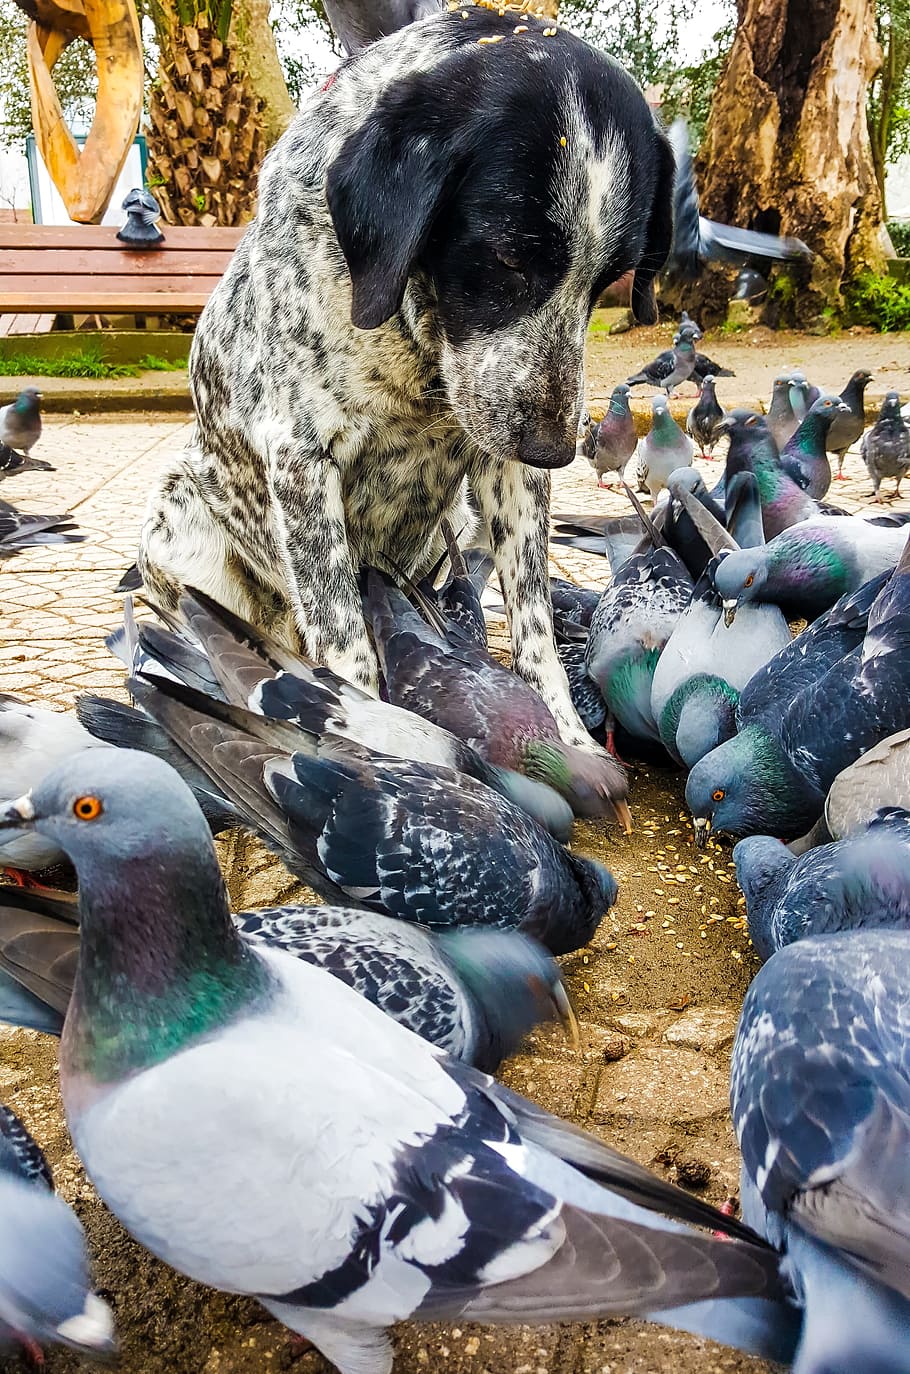 surrounded, flock, pigeons, Dog, Pigeon, Animal, Bird, Background, in background, day